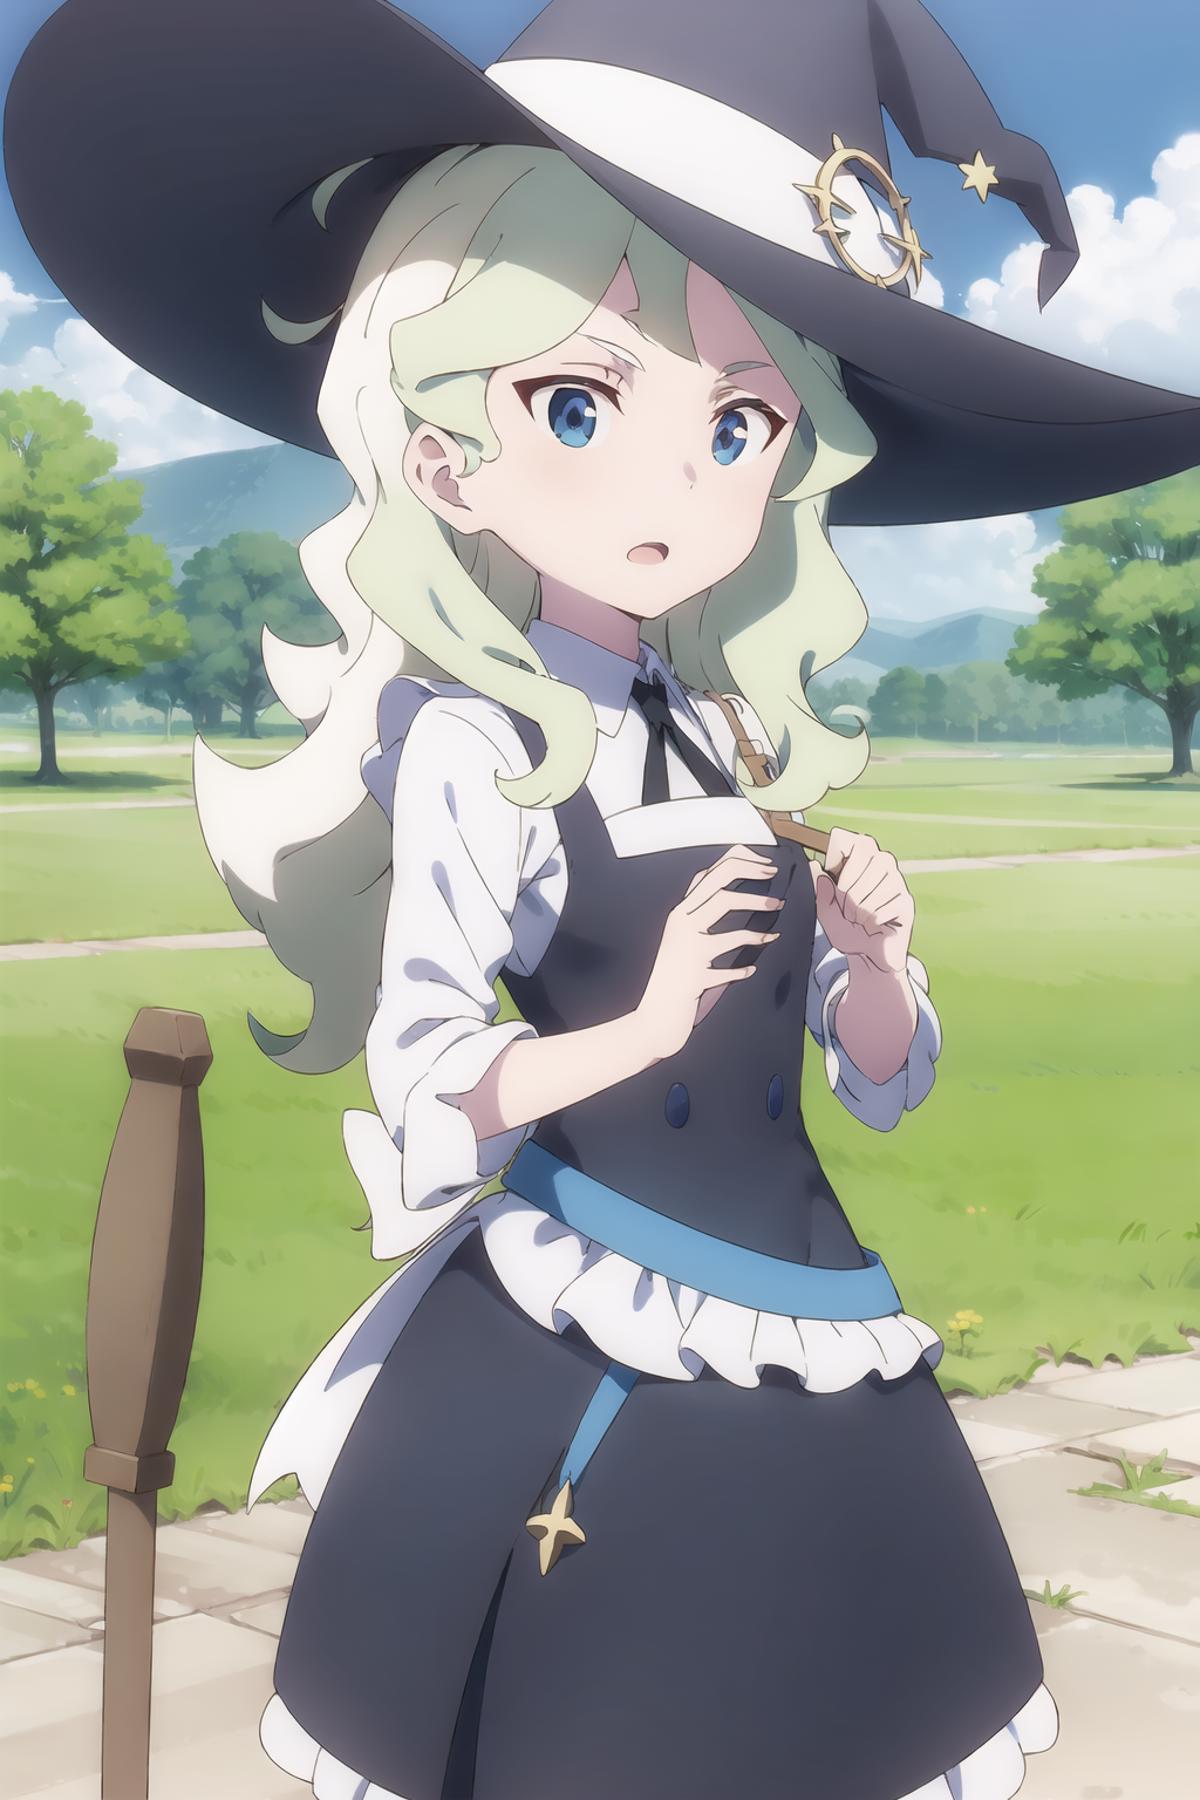 Diana Cavendish (Little Witch Academia) image by BDZ888